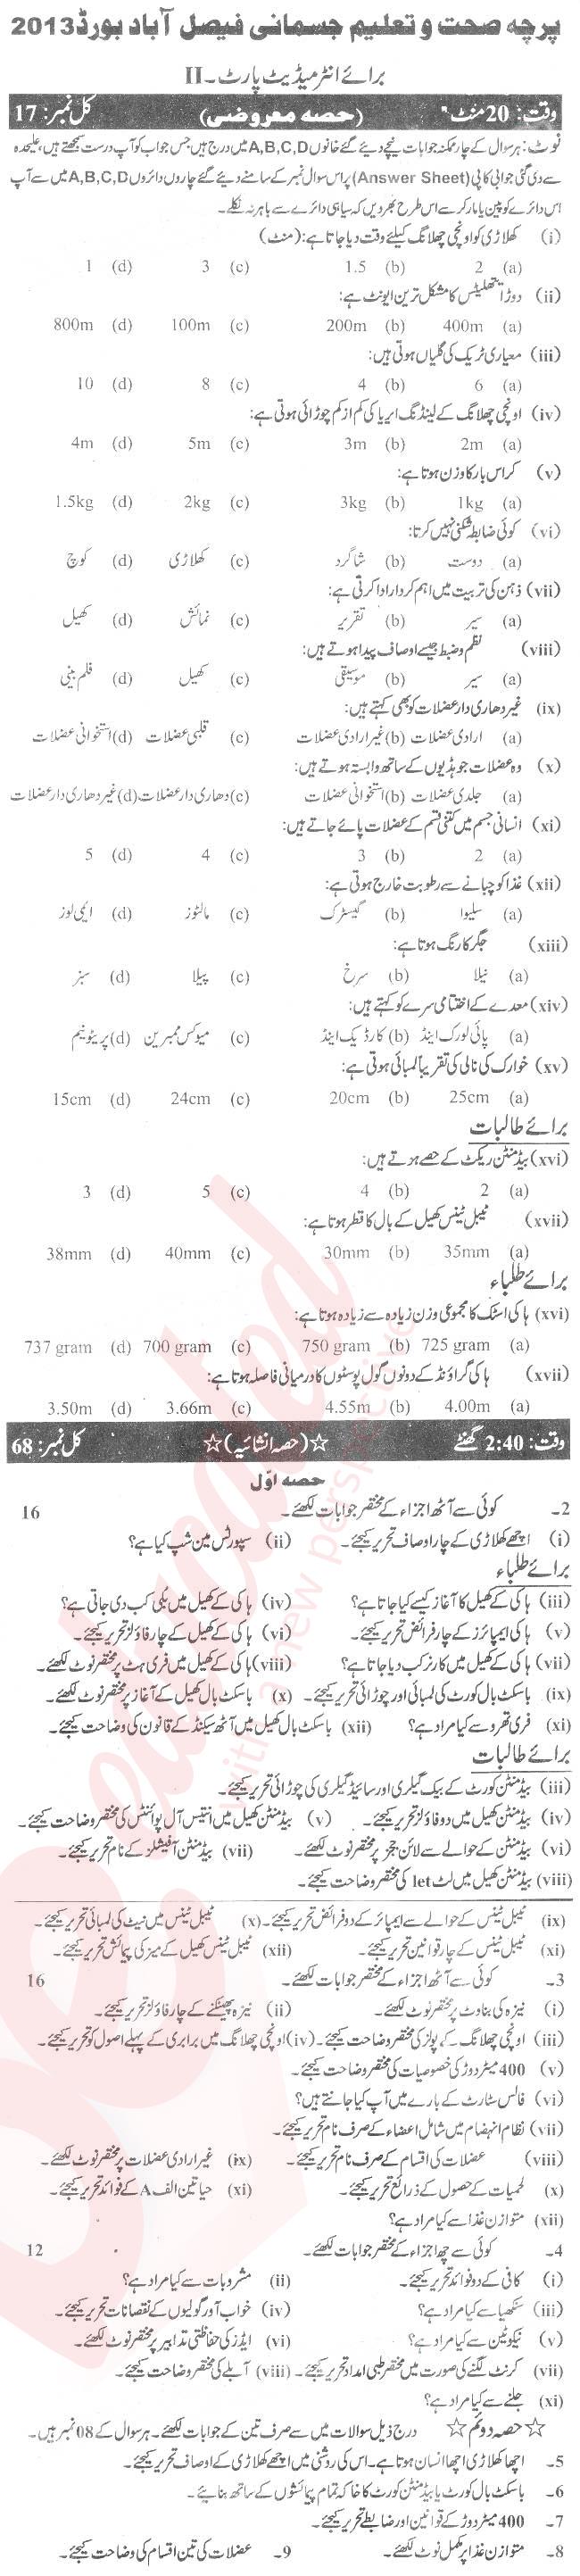 Health and Physical Education FA Part 2 Past Paper Group 1 BISE Faisalabad 2013